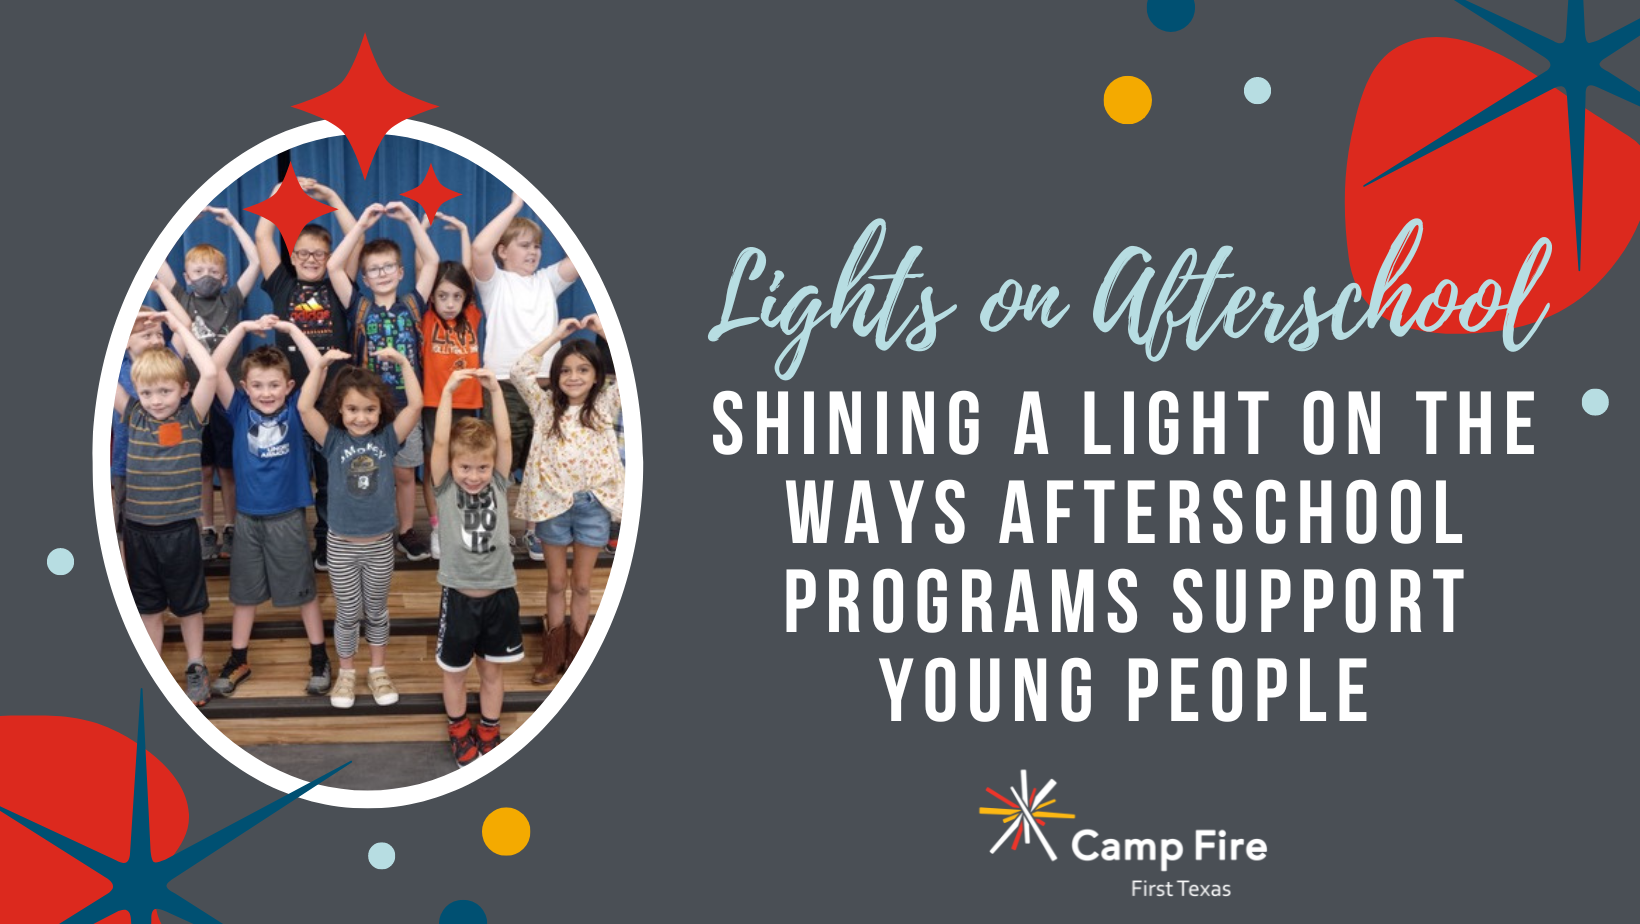 Camp Fire President & CEO Lauren Richard Celebrates Two Years of Success!, a Camp Fire First Texas blog